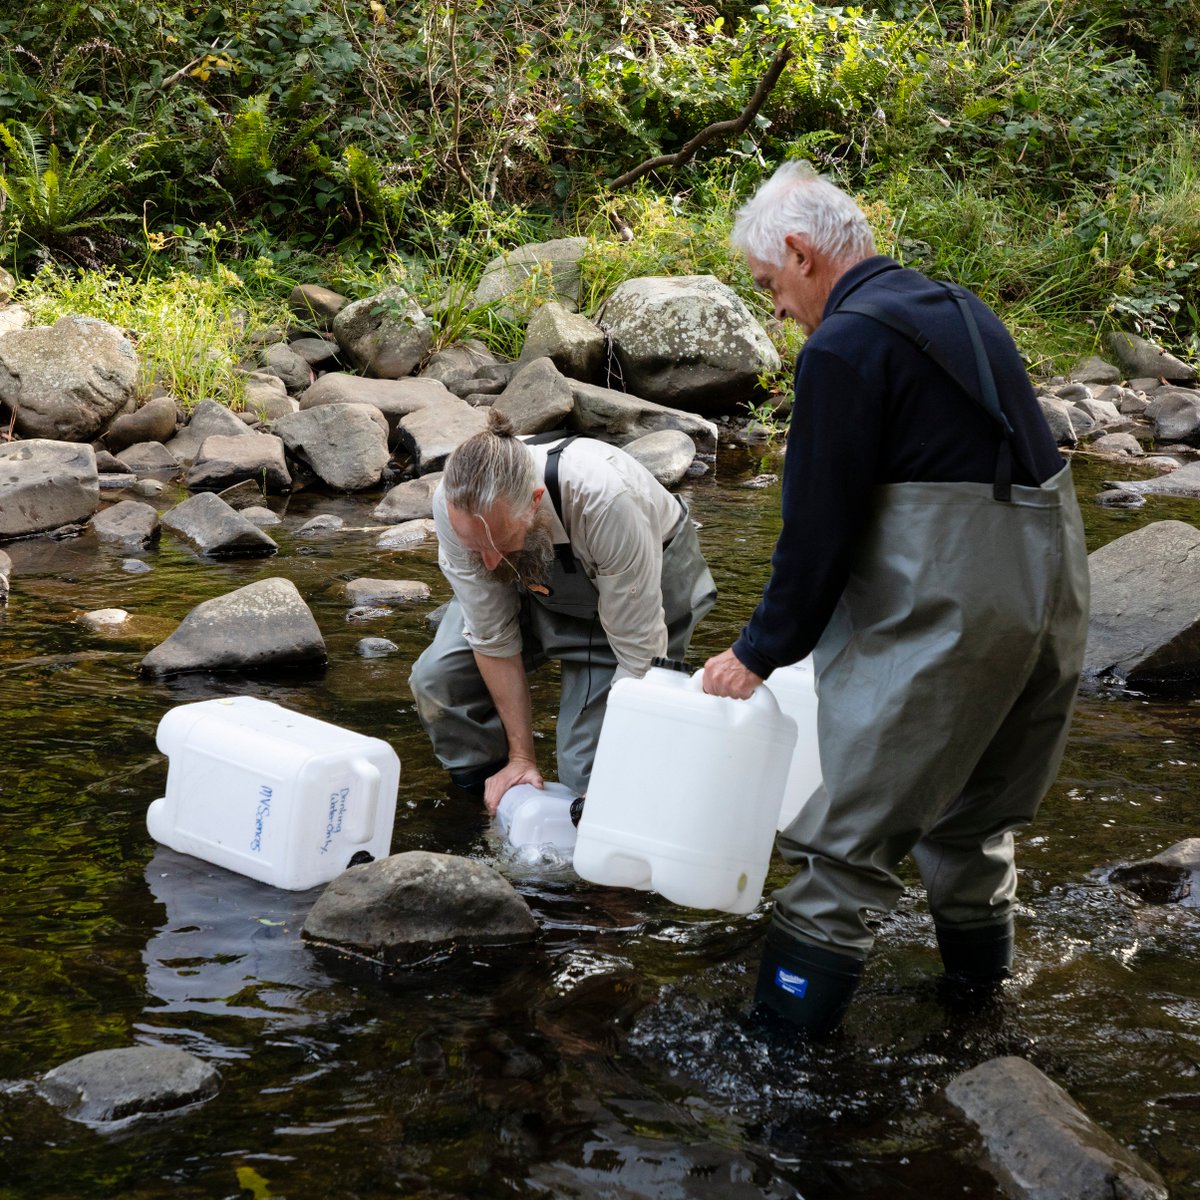 Wade into the waters of the Cumberland River with Dr Julian Finn & Dr Richard Marchant and learn more about work done with  @ParksVictoria on the Otway Bioscan here:  https://collections.museumsvictoria.com.au/articles/16719   #DigitsForGood